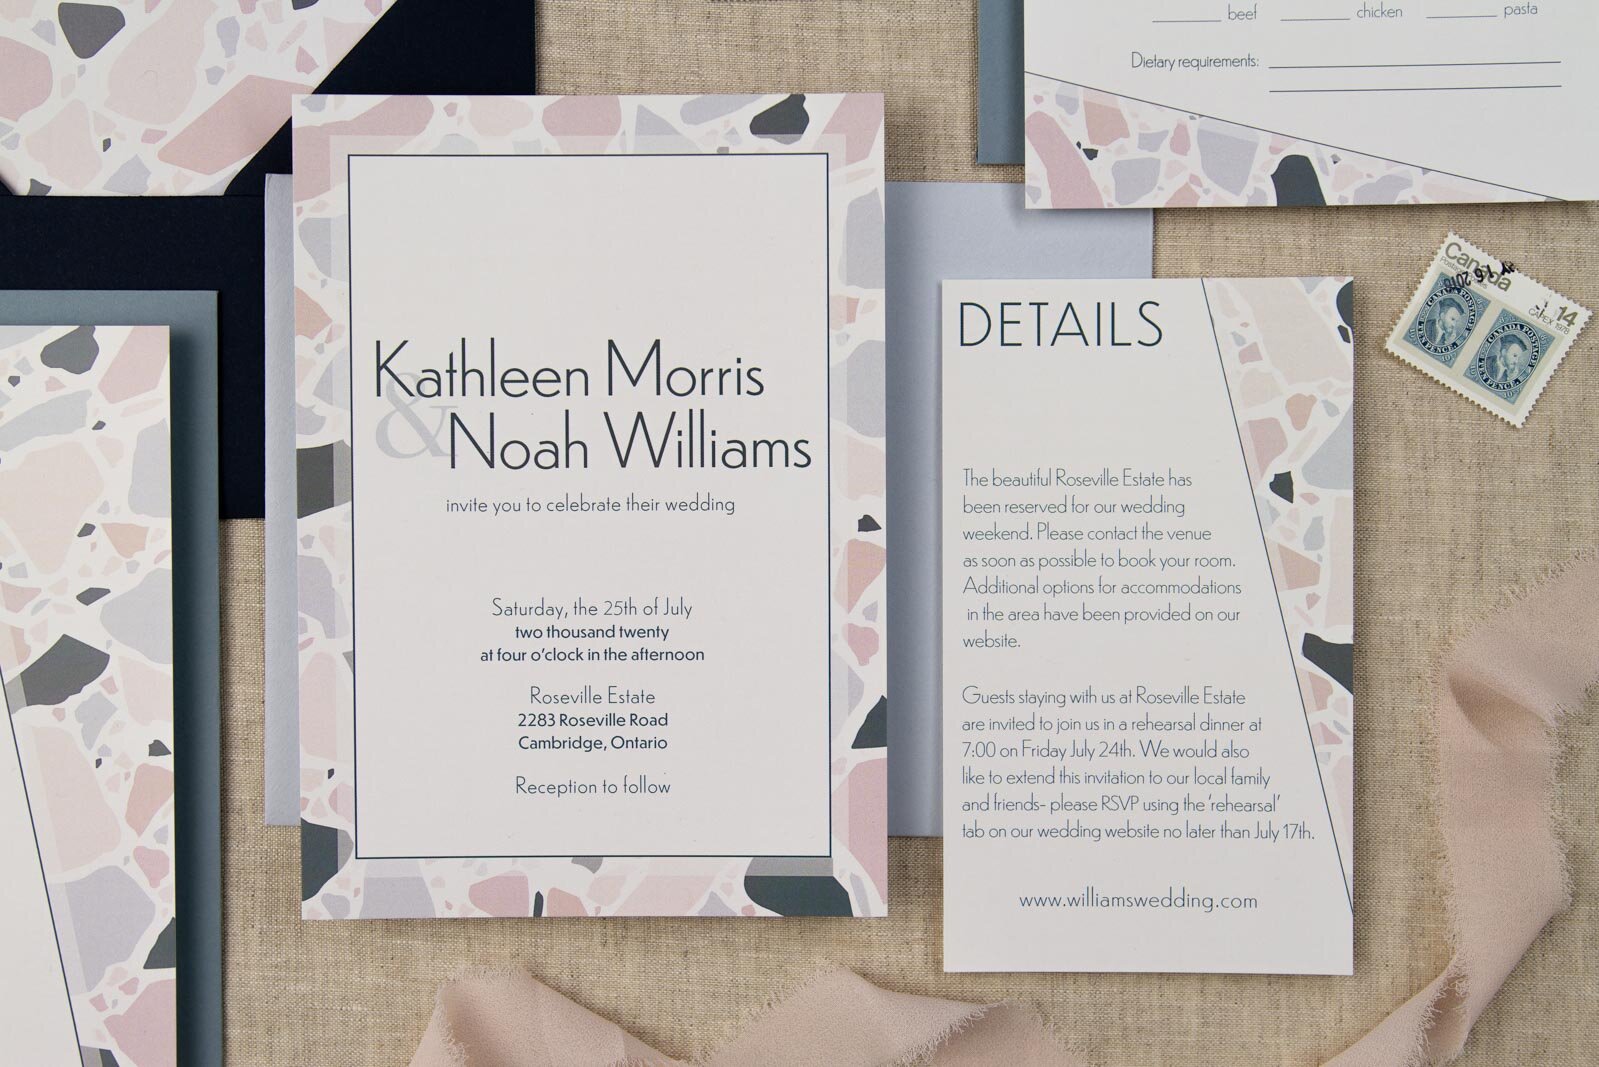  Semi-custom wedding invitation and details card, both featuring geometric accents in a pastel terrazzo pattern. 